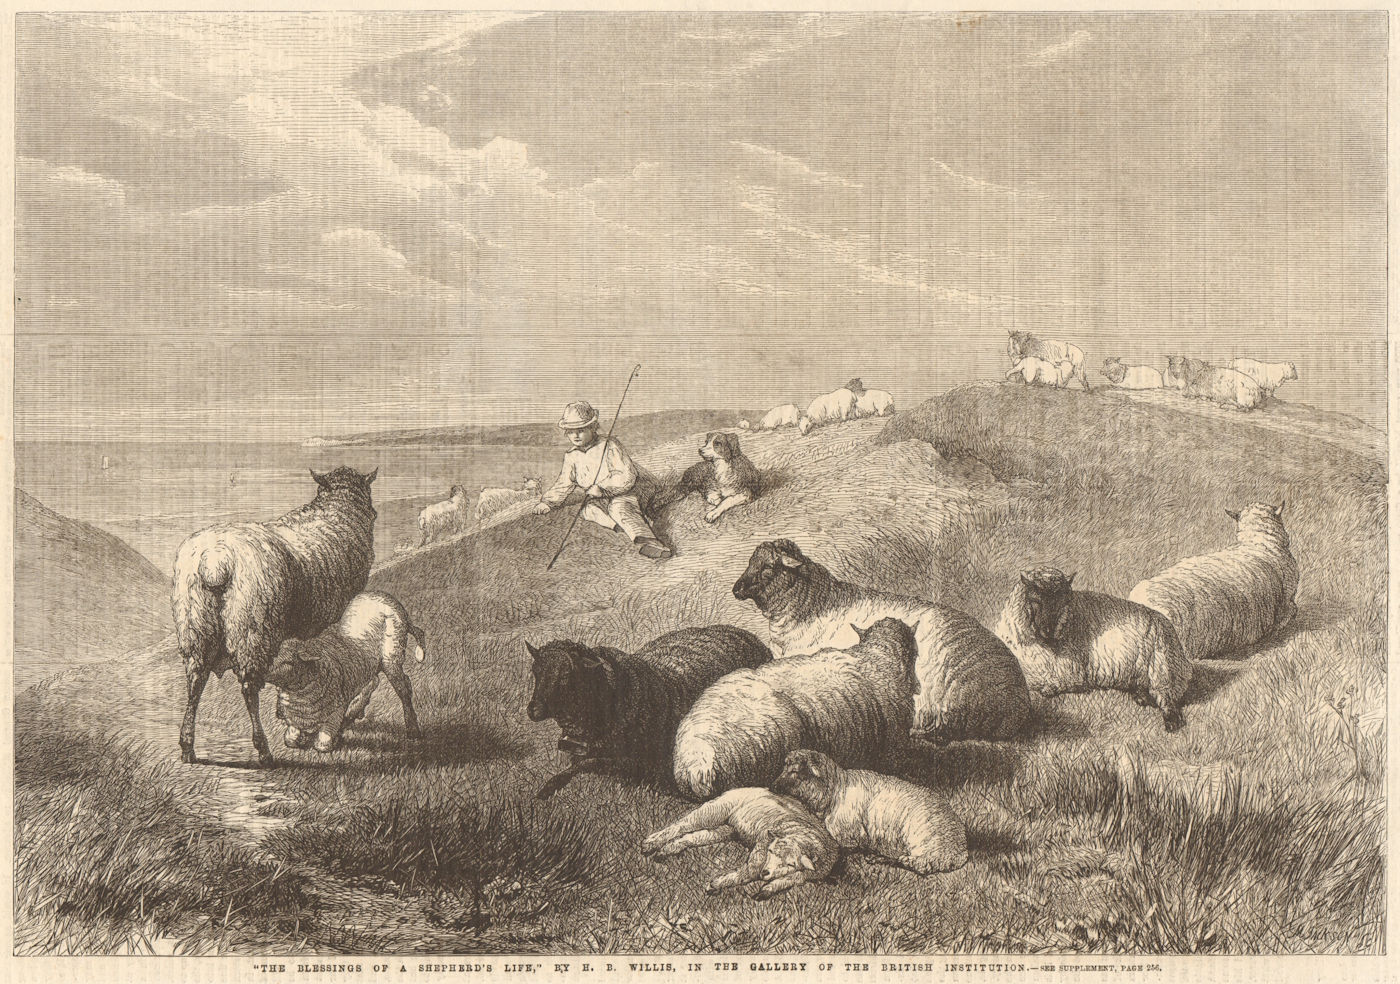 "The blessings of a shepherd's life" by H. B. Willis. Farming. Sheep 1862